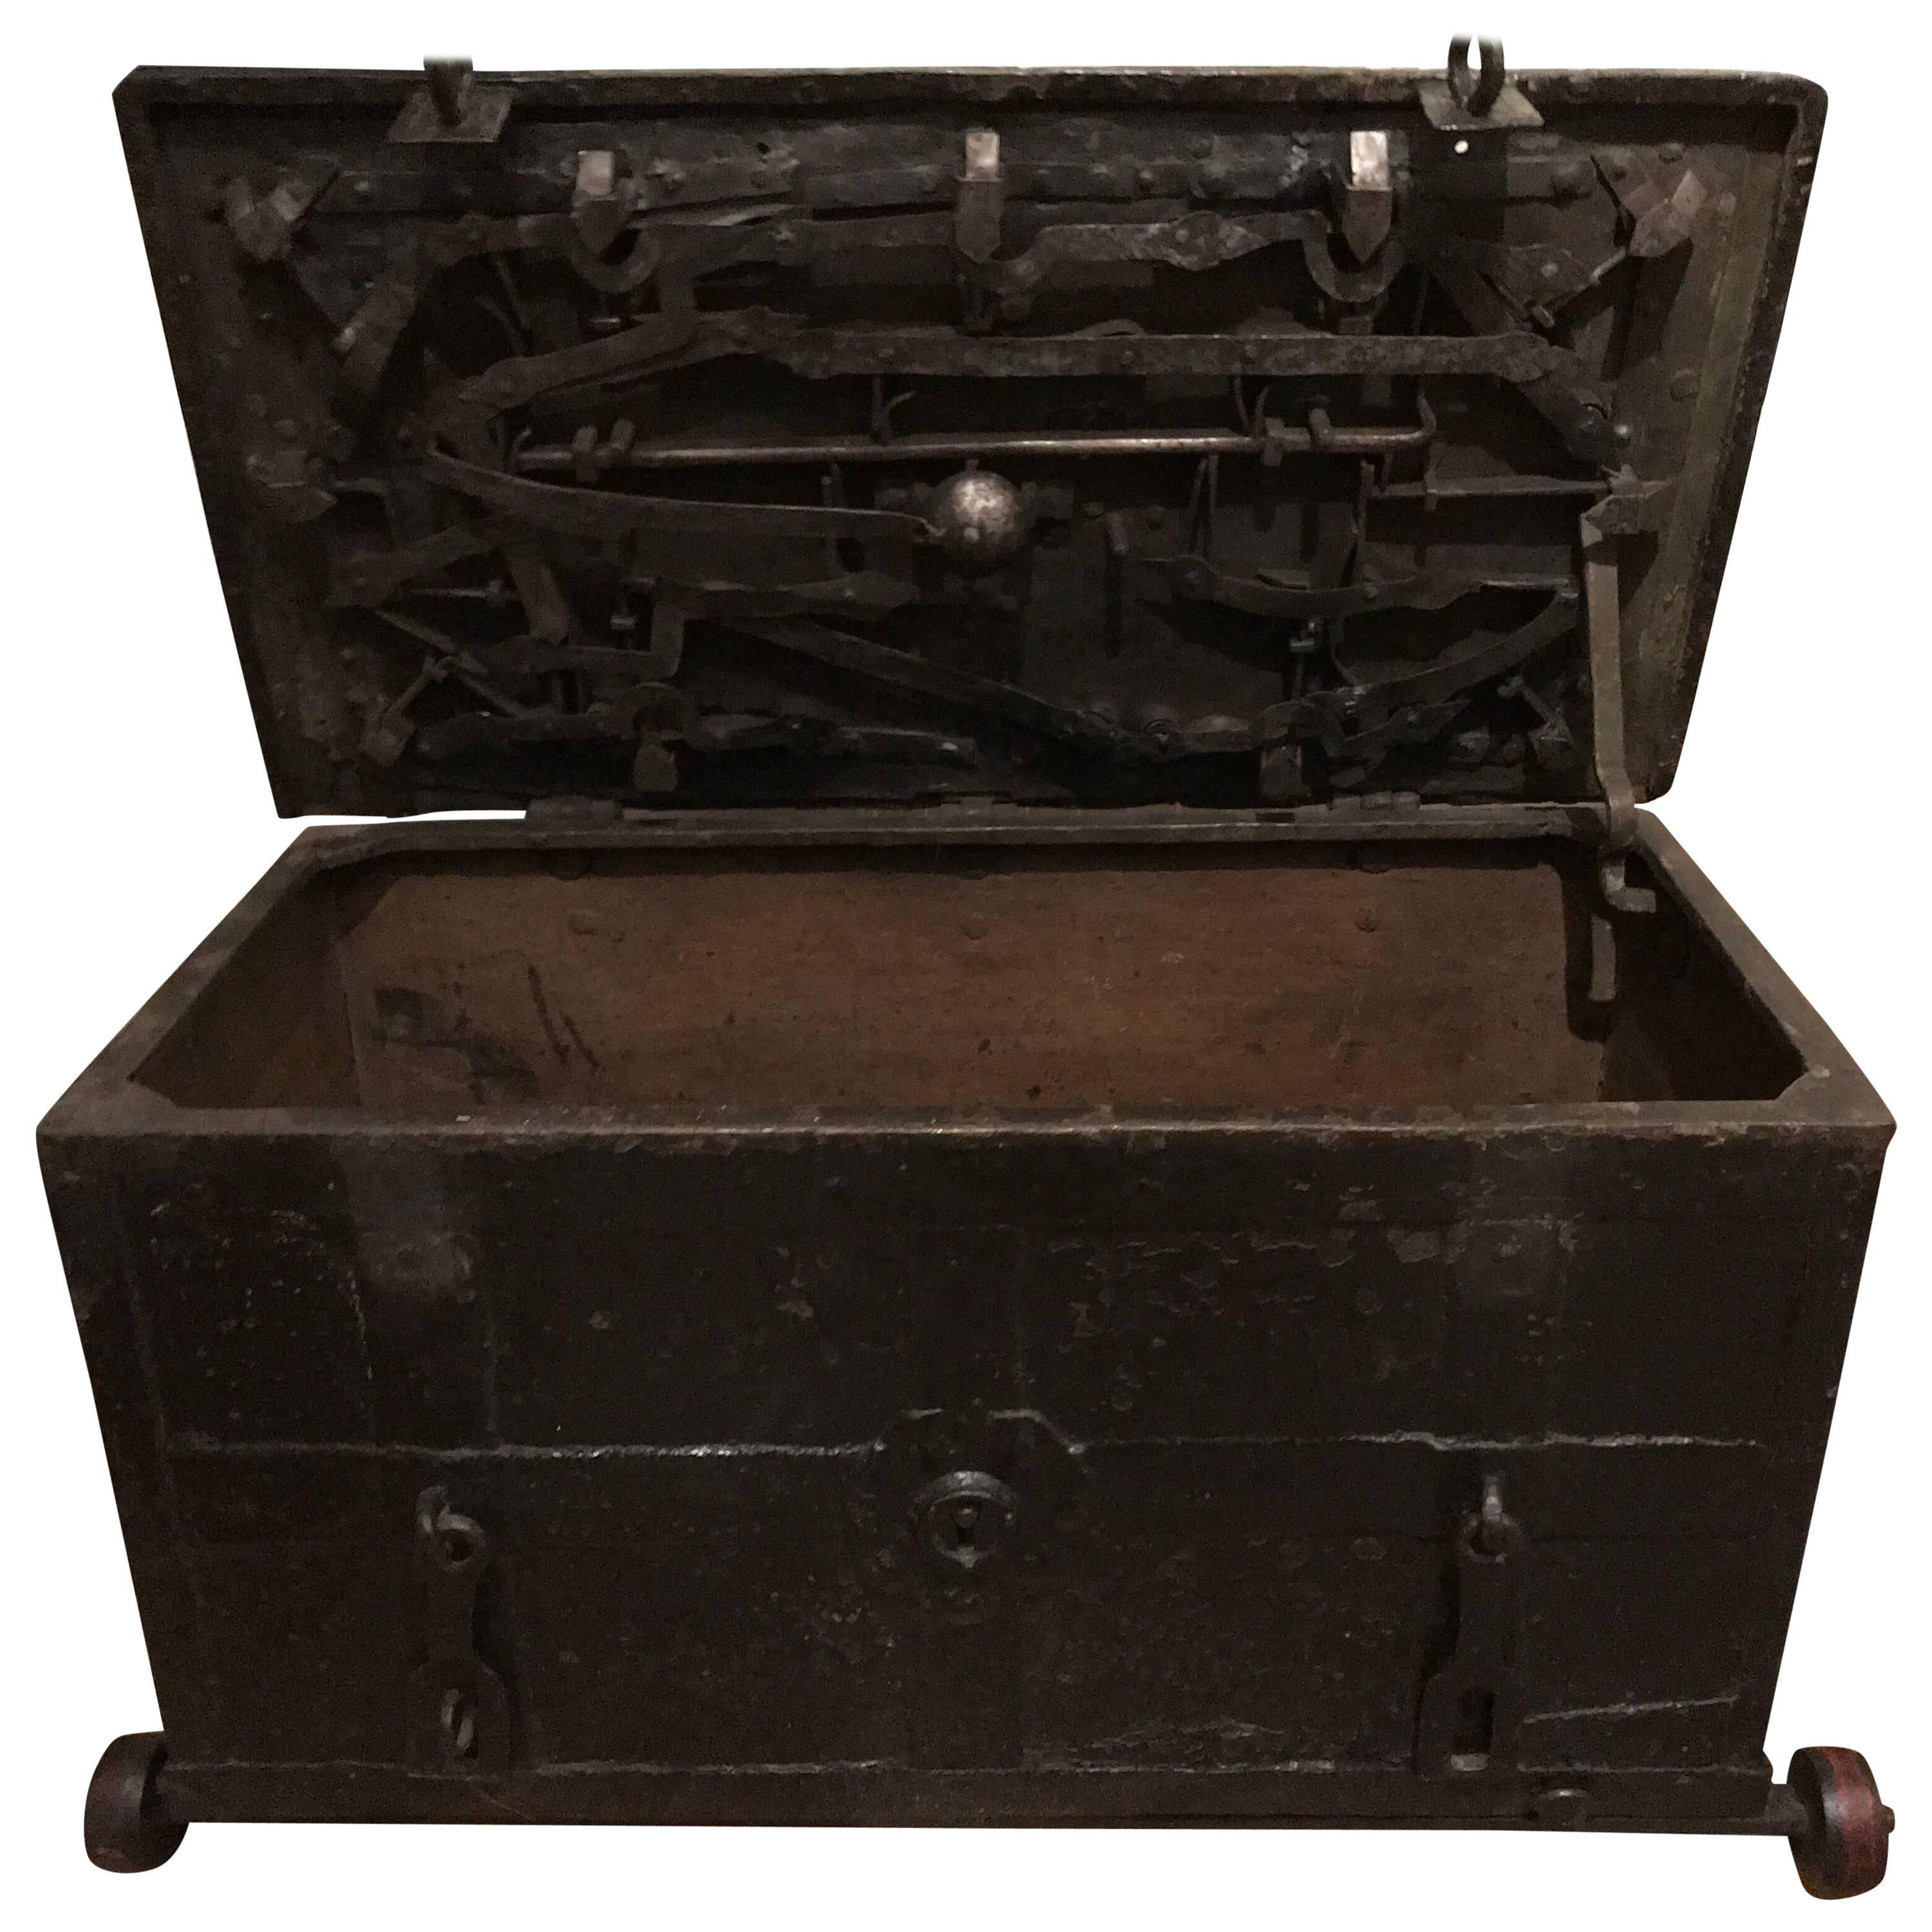 Exclusive 16th Century Strong Box Spanish with Original Wheels and Key  11 slots